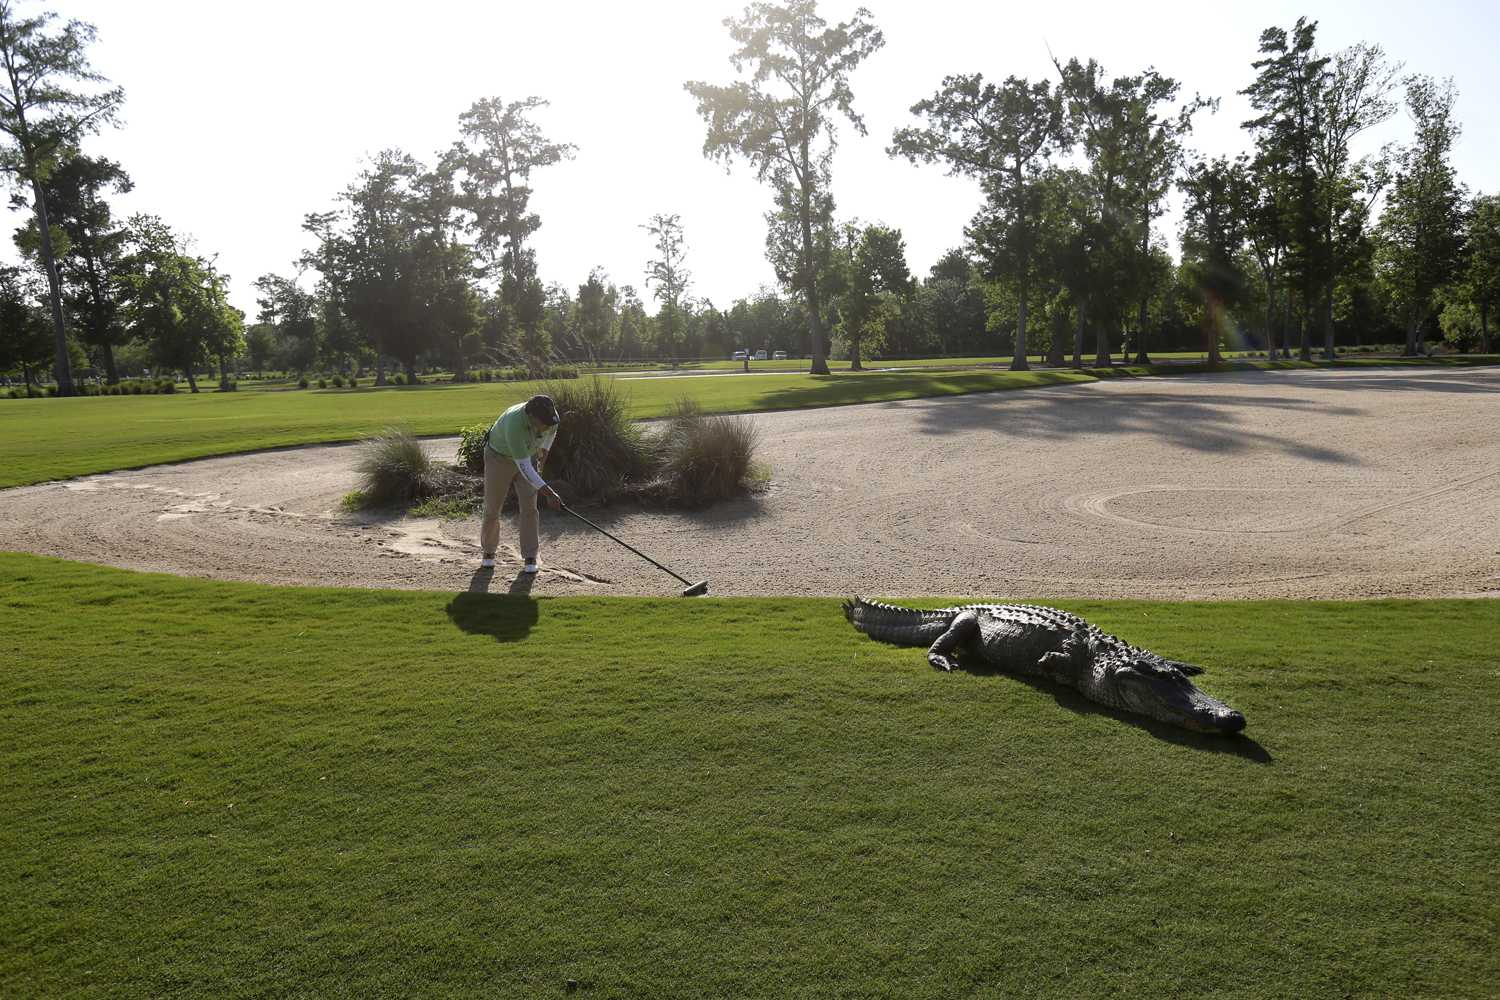 April 25, 2013. A worker grooms away tracks after an alligator crossed through a sand trap on the 14th hole during the first round of the PGA Tour Zurich Classic golf tournament at TPC Louisiana in Avondale, La.